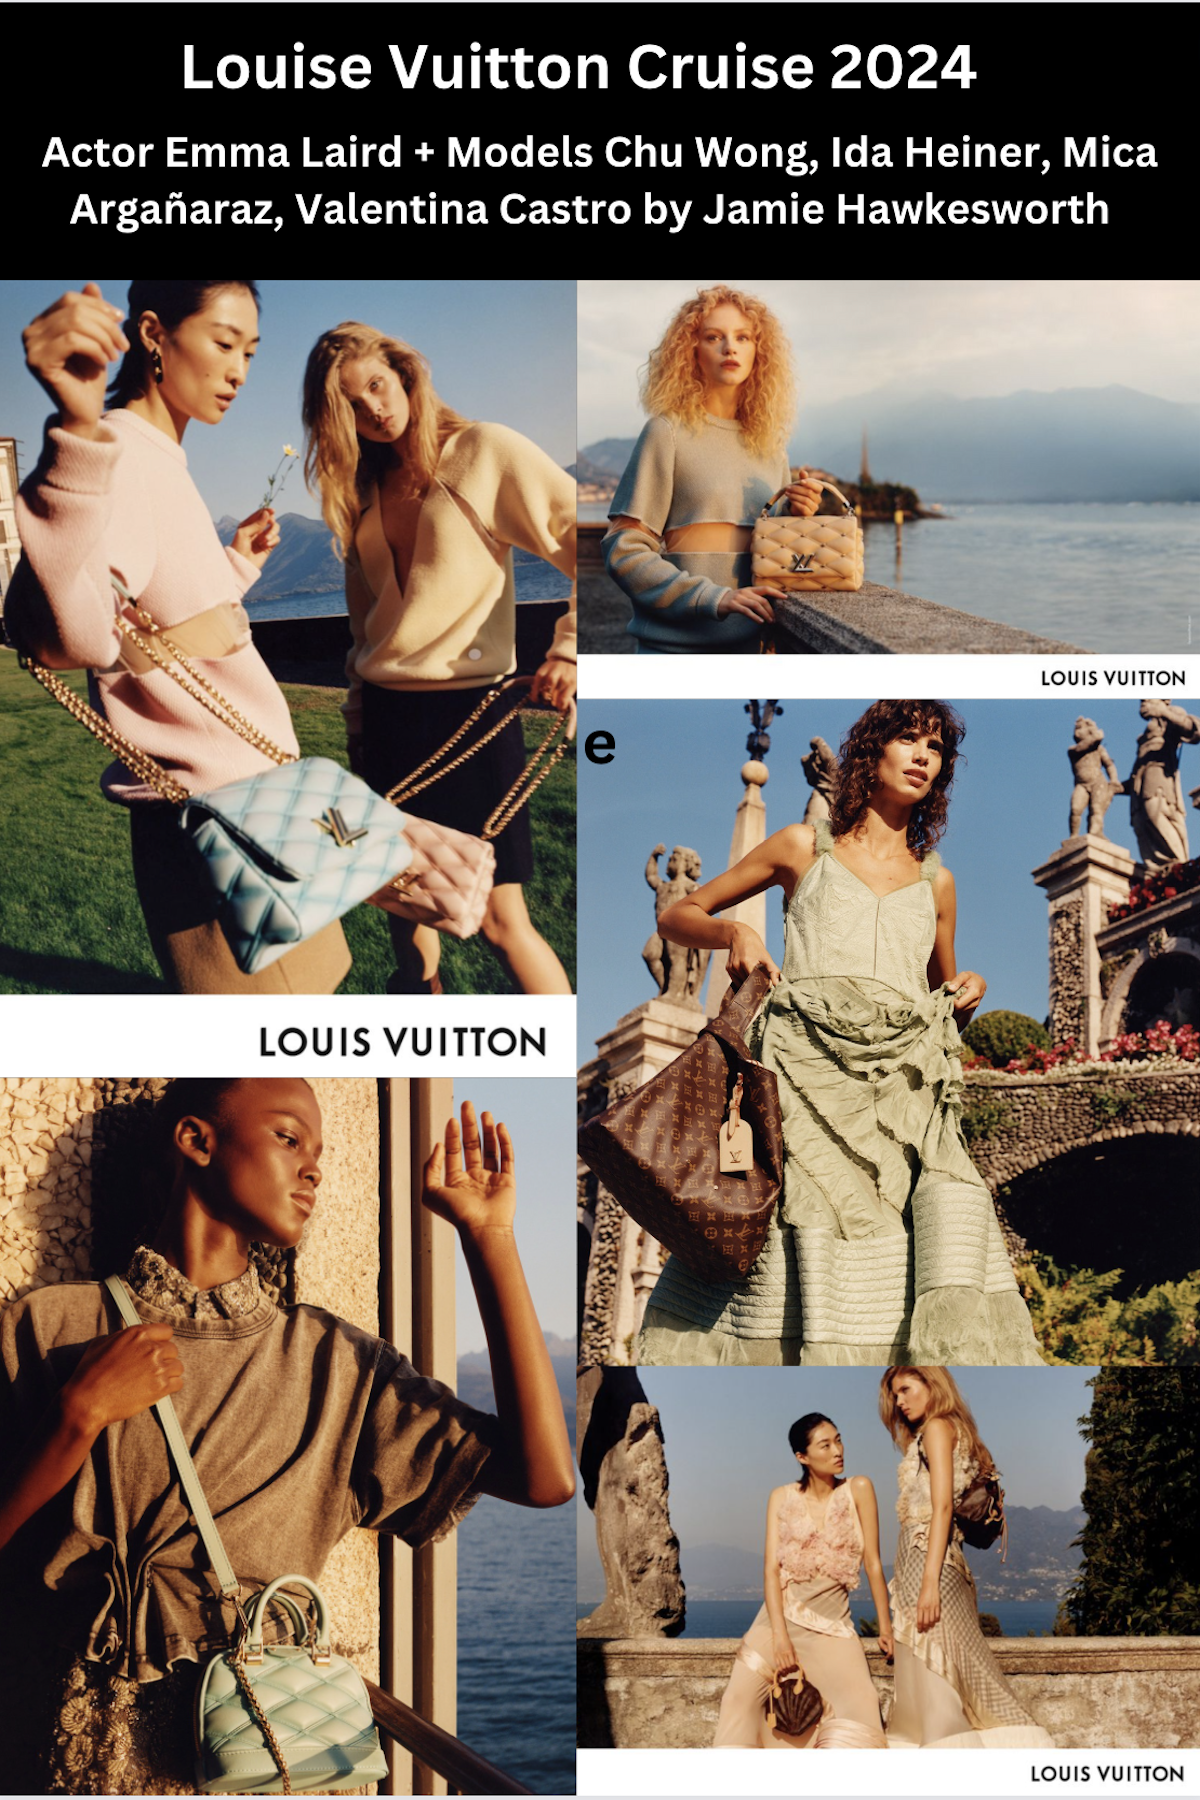 British Actress Emma Laird Stars in First Campaign for Louis